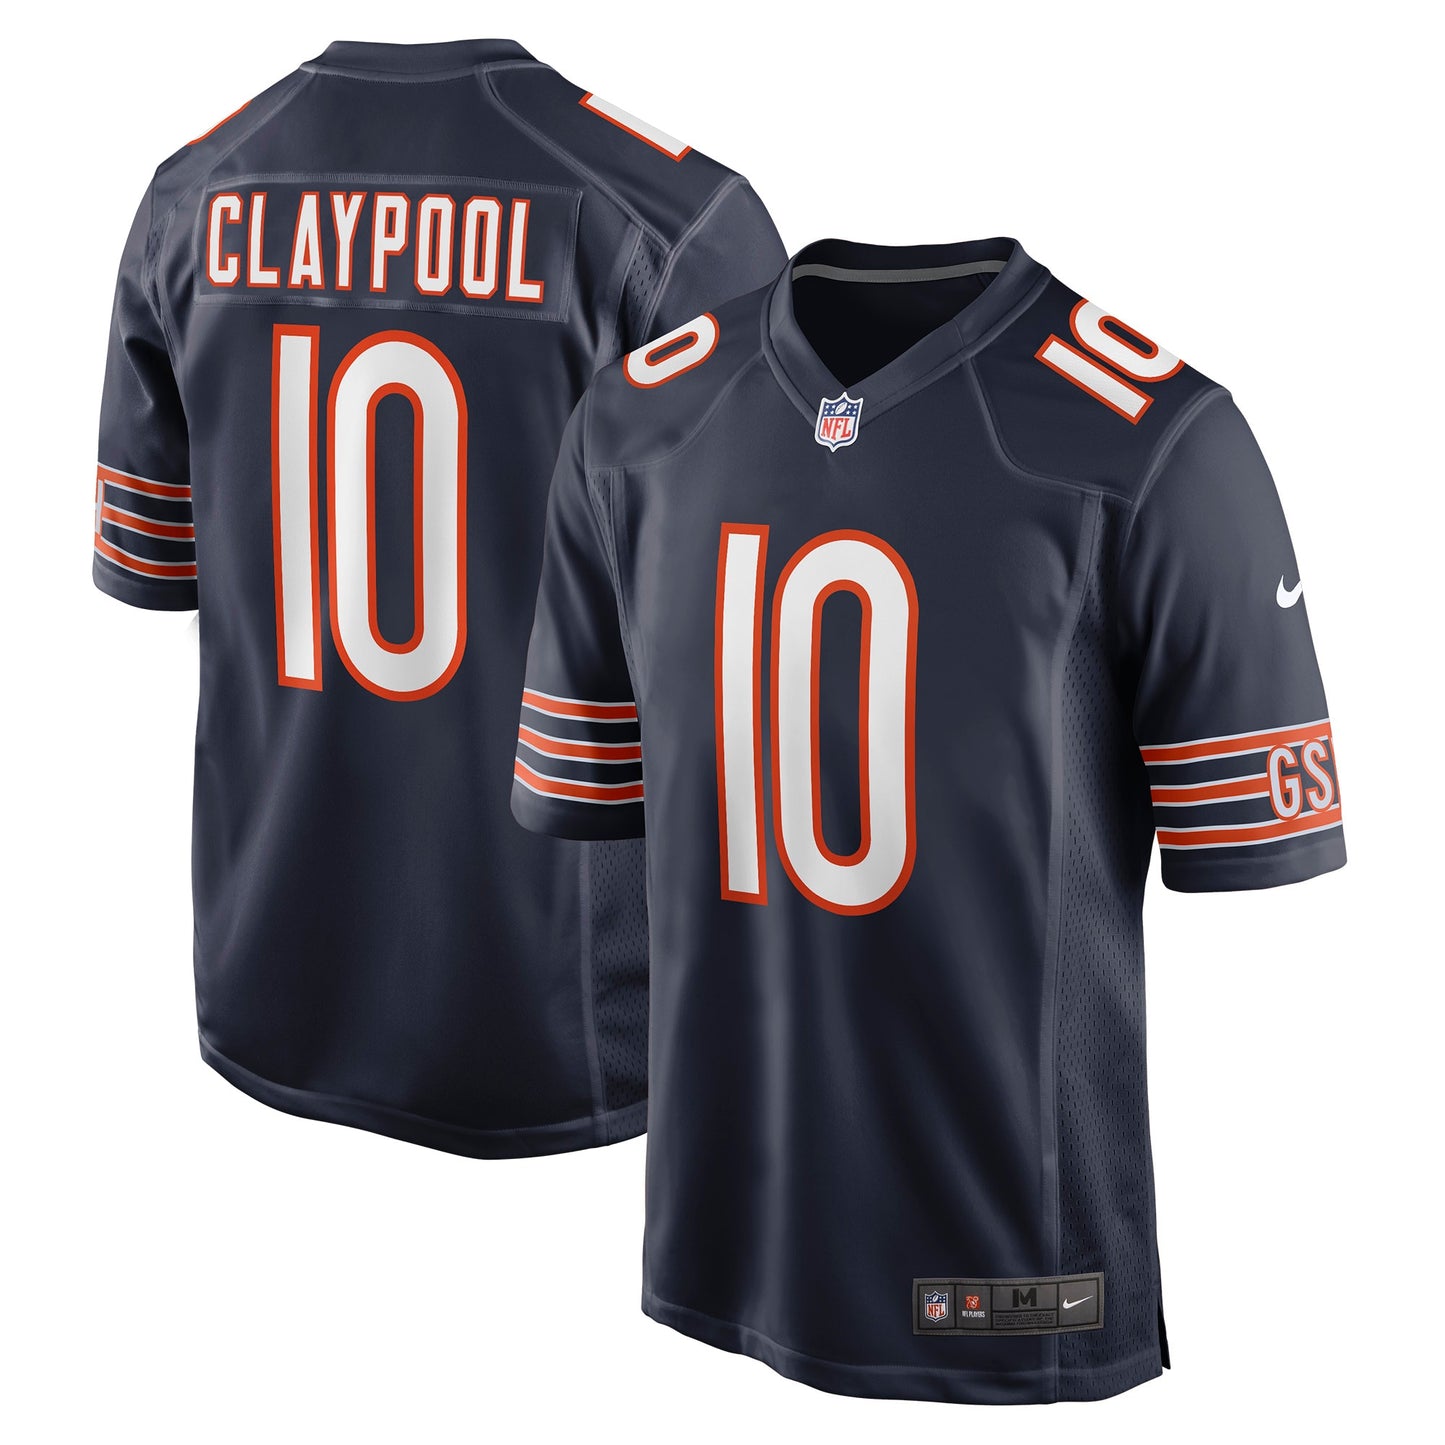 Chase Claypool Chicago Bears Nike Game Player Jersey - Navy